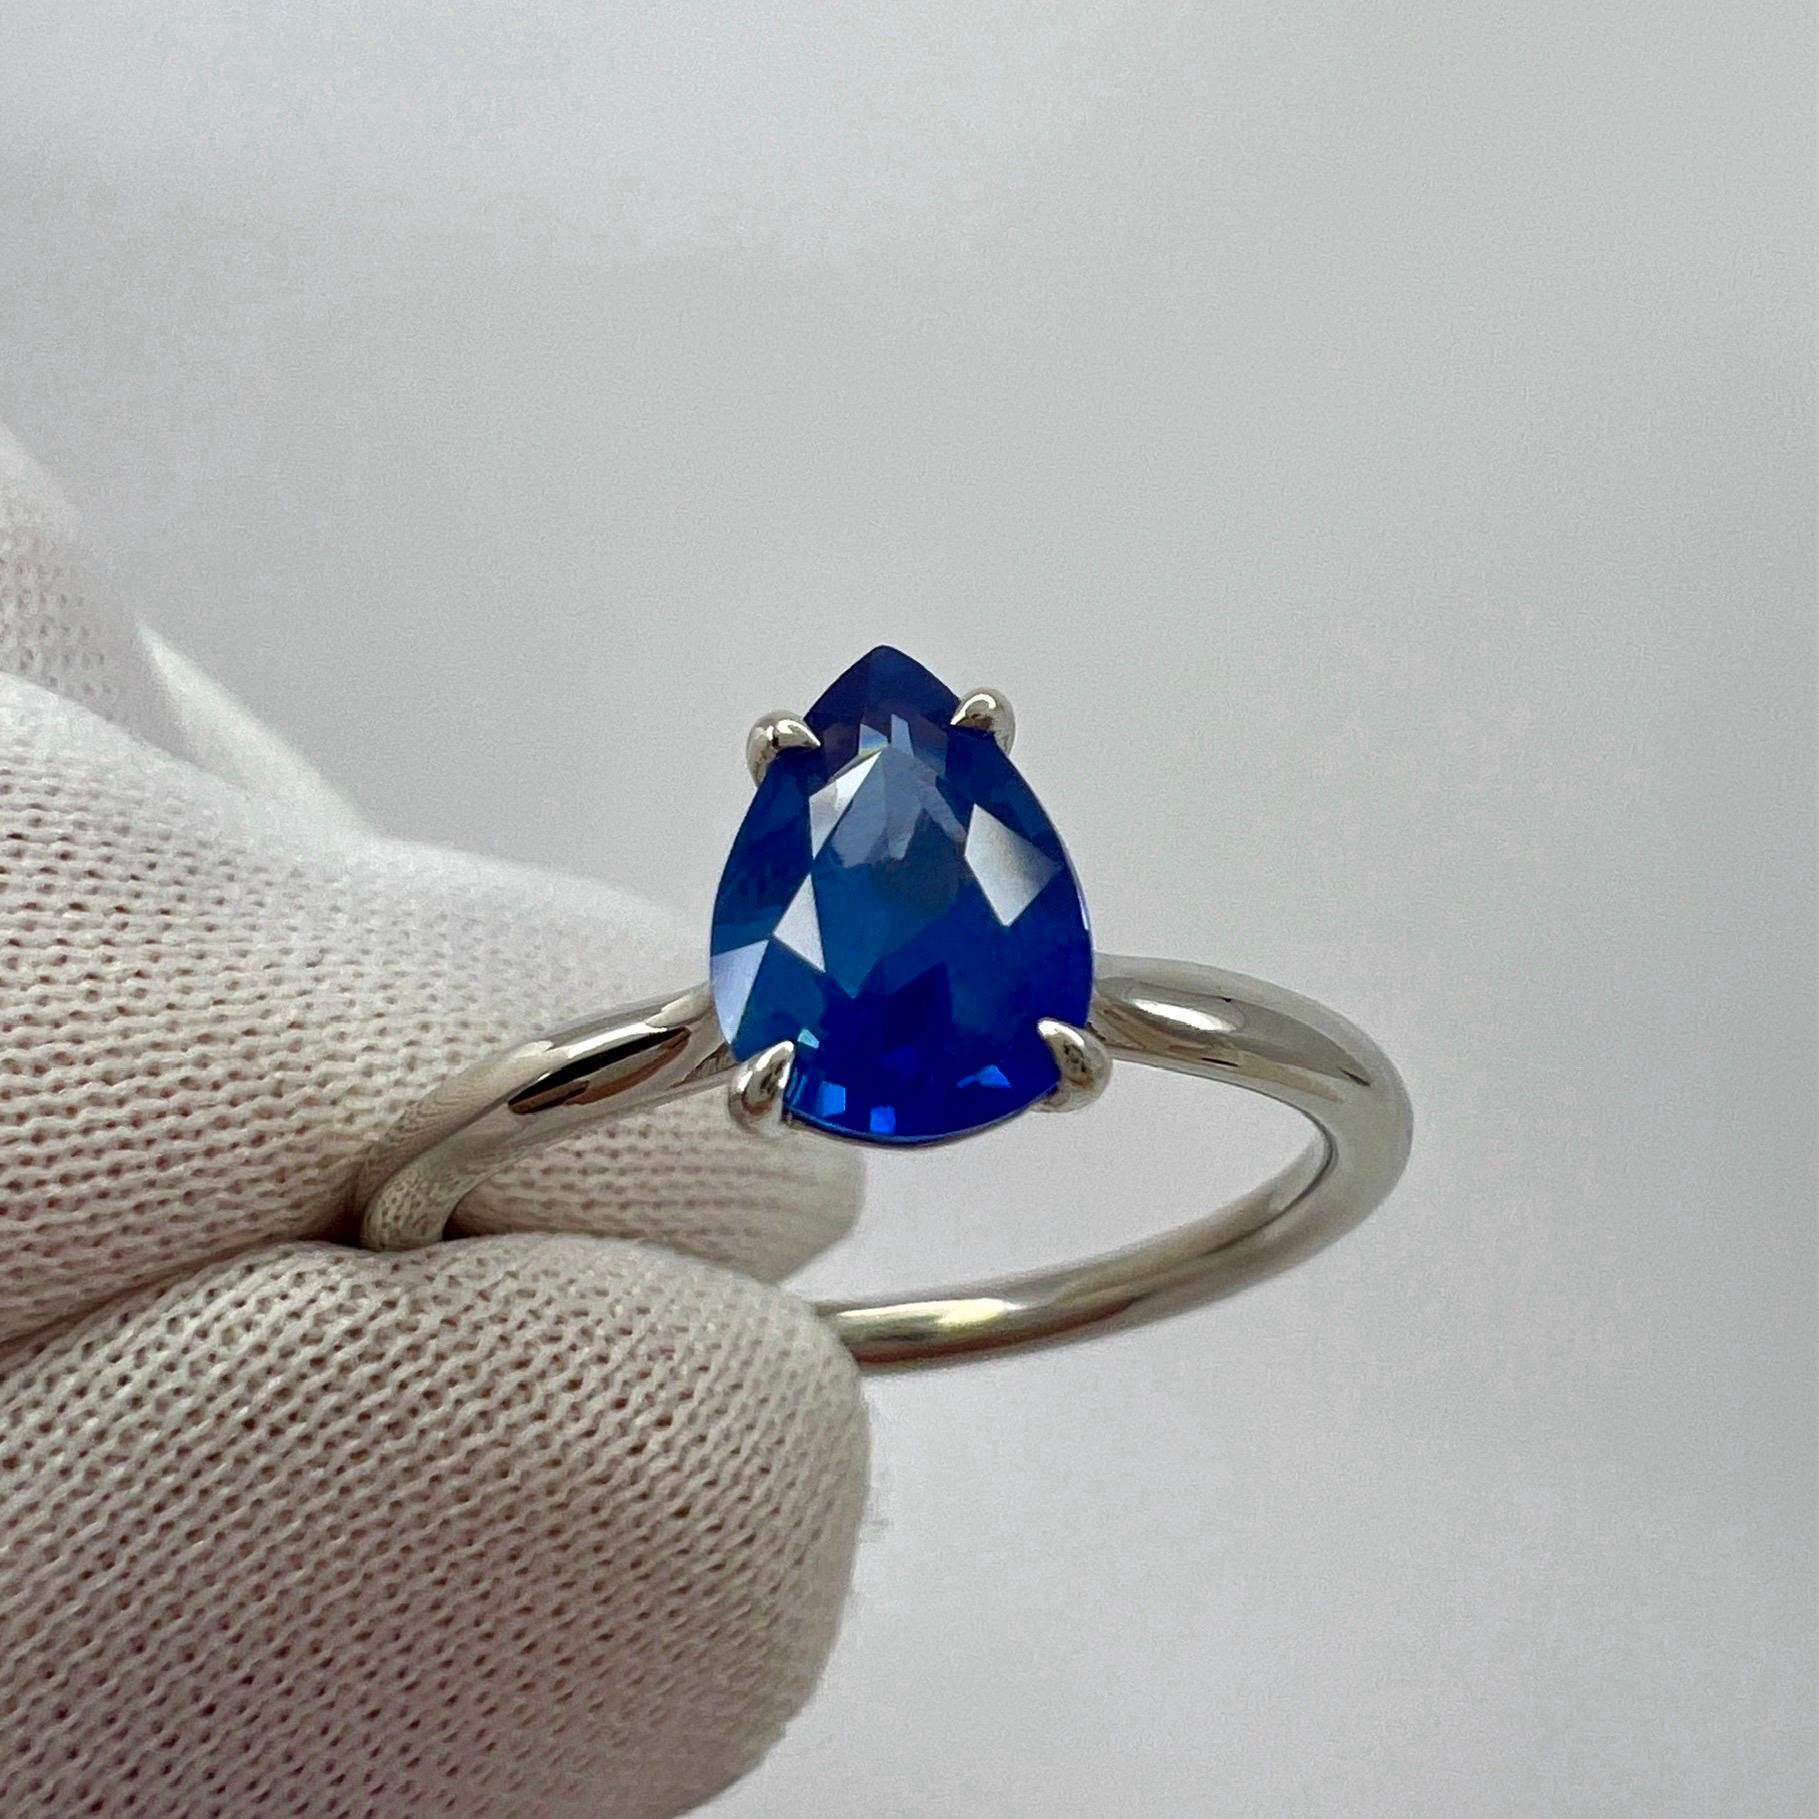 1.17ct Cornflower Blue Sapphire Pear Teardrop Cut 18k White Gold Solitaire Ring For Sale 1